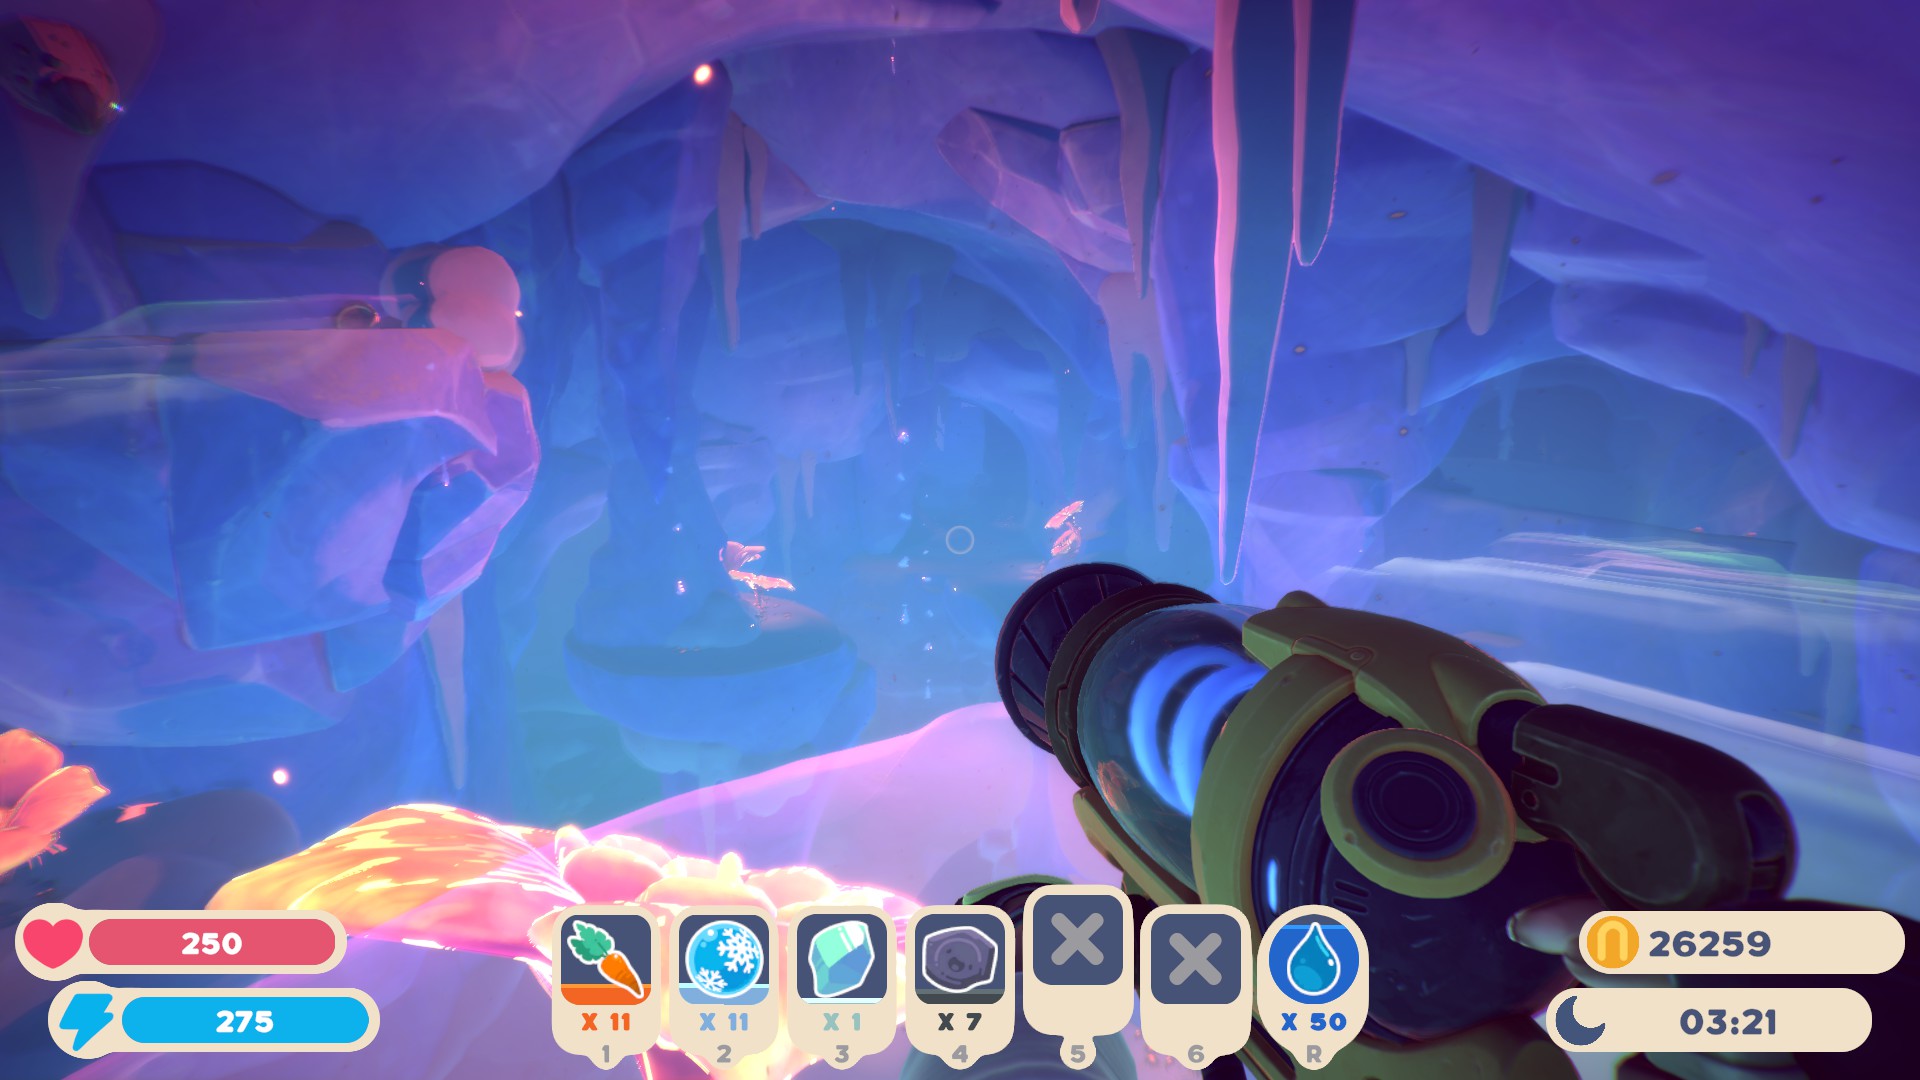 Slime Rancher 2 - Capsule Locations for Powderfall Bluffs - Pods 7 - 12 (Underground) - E26F5A0